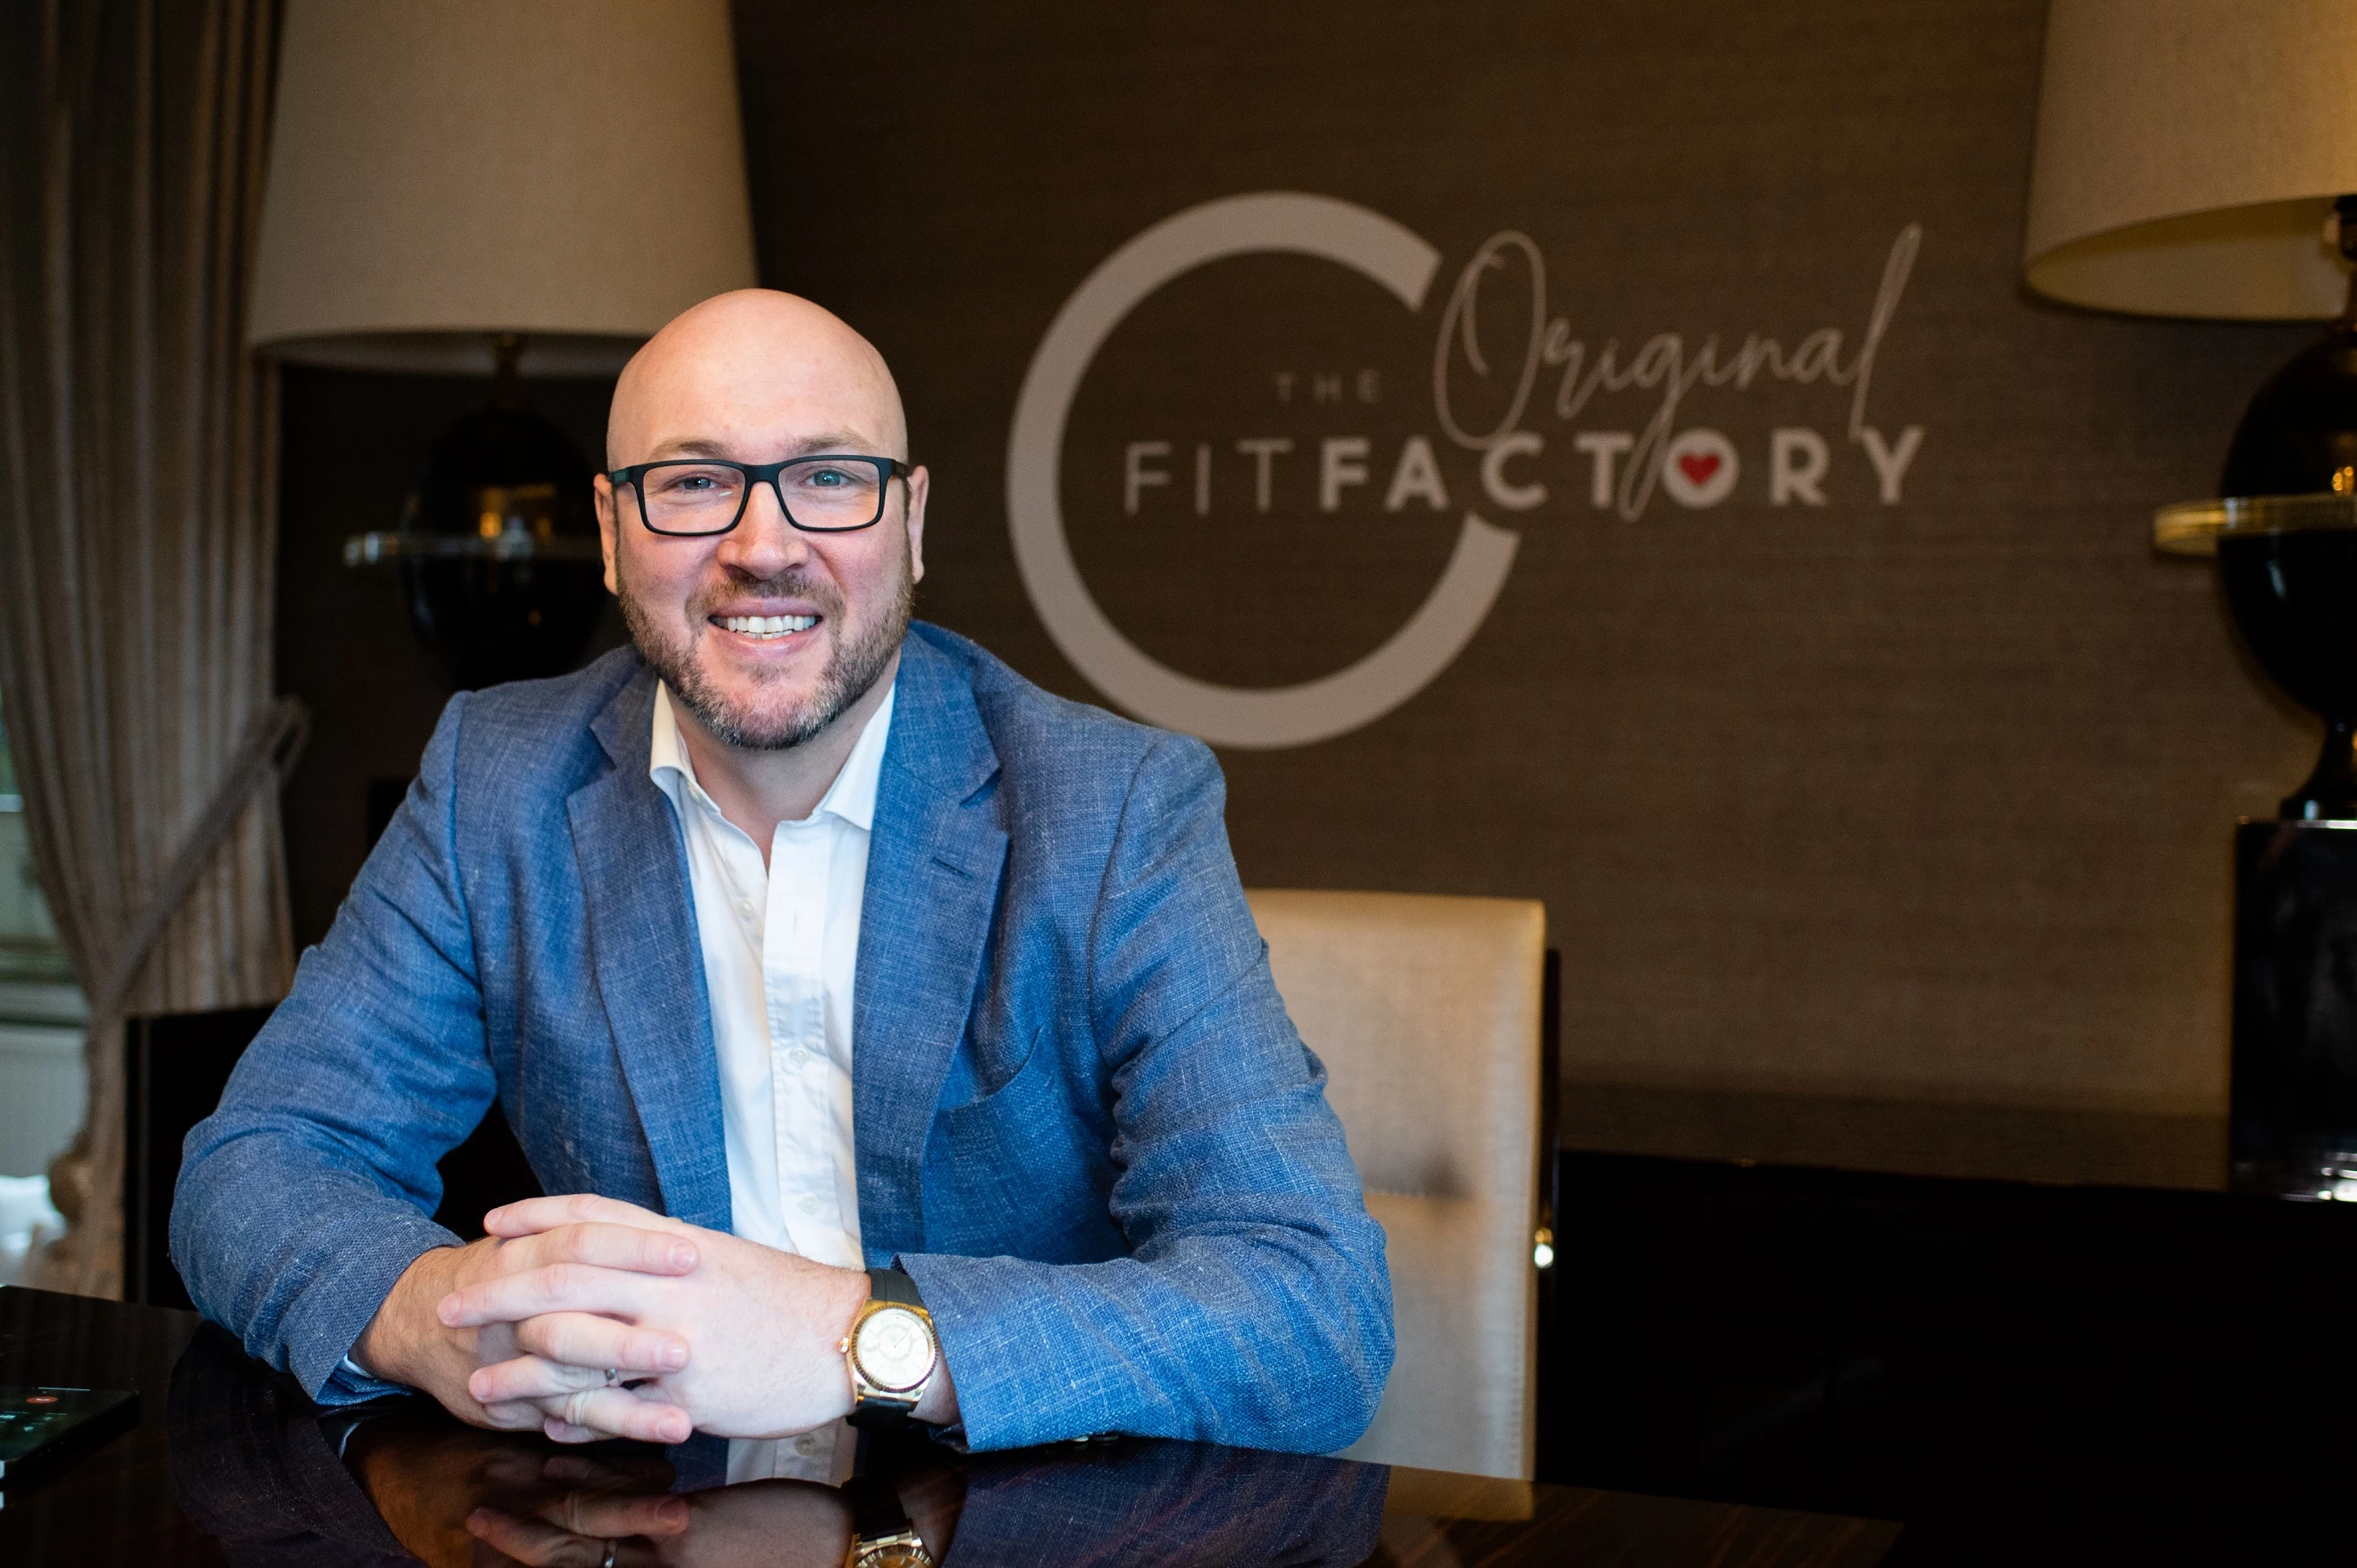 The Original Fit Factory founder and CEO - David Weir - $137m Acquisition